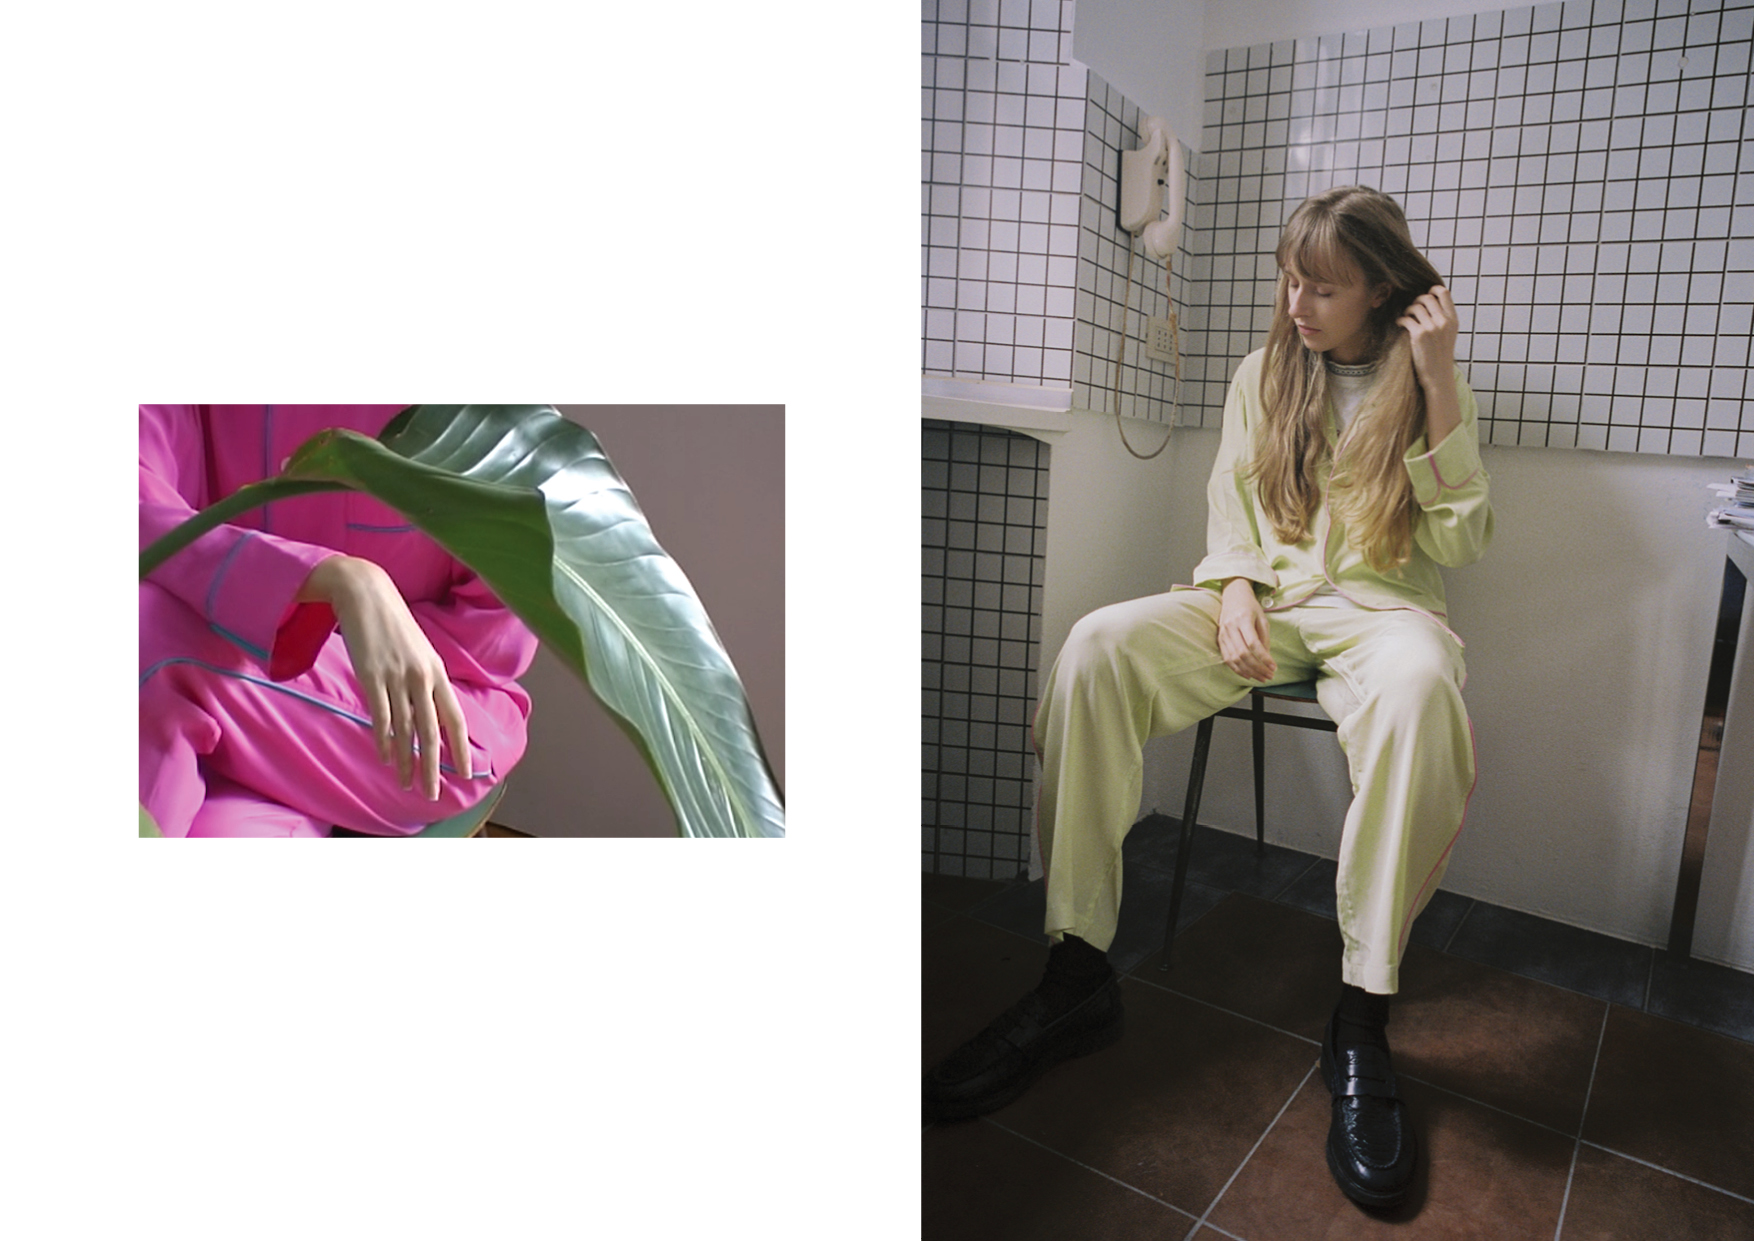  Silk nightwear shirt and trousers OLATZ, t-shirt and leather loafers stylist archive 